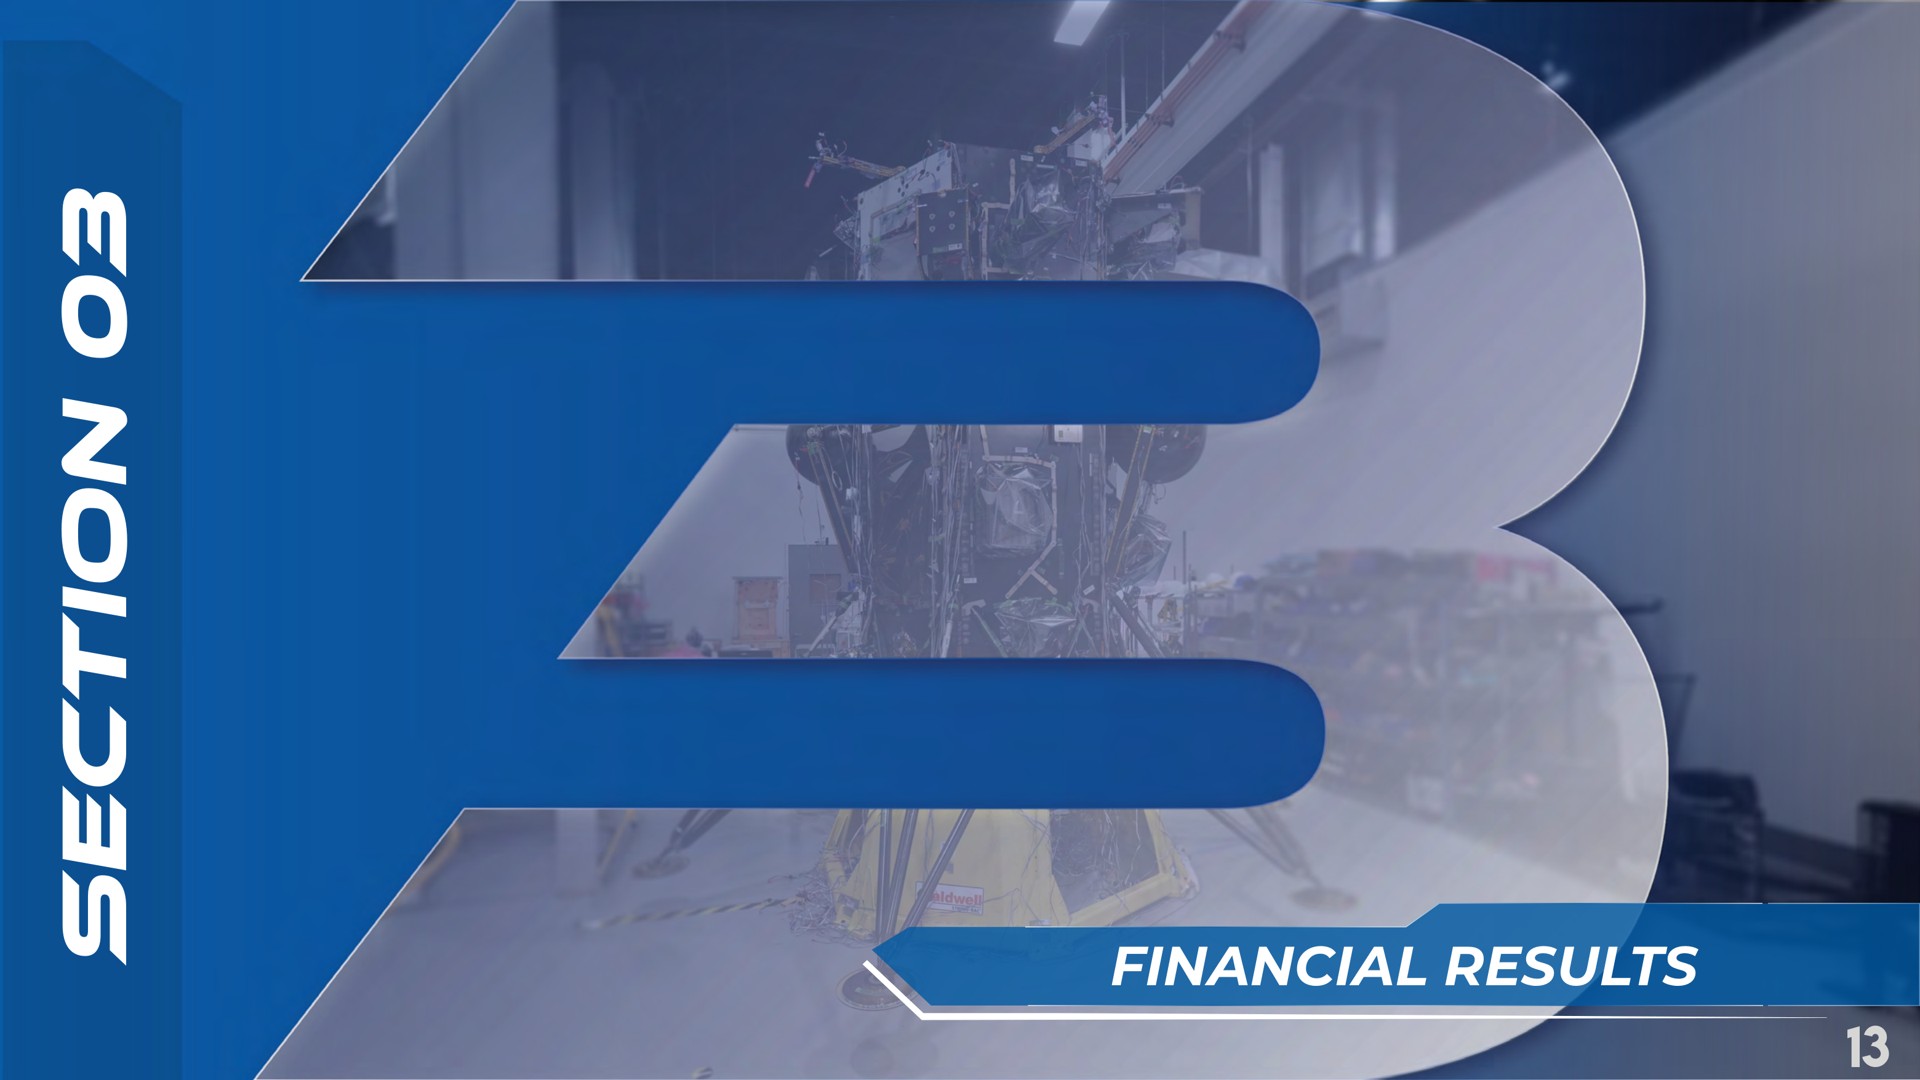 financial results i a | Intuitive Machines